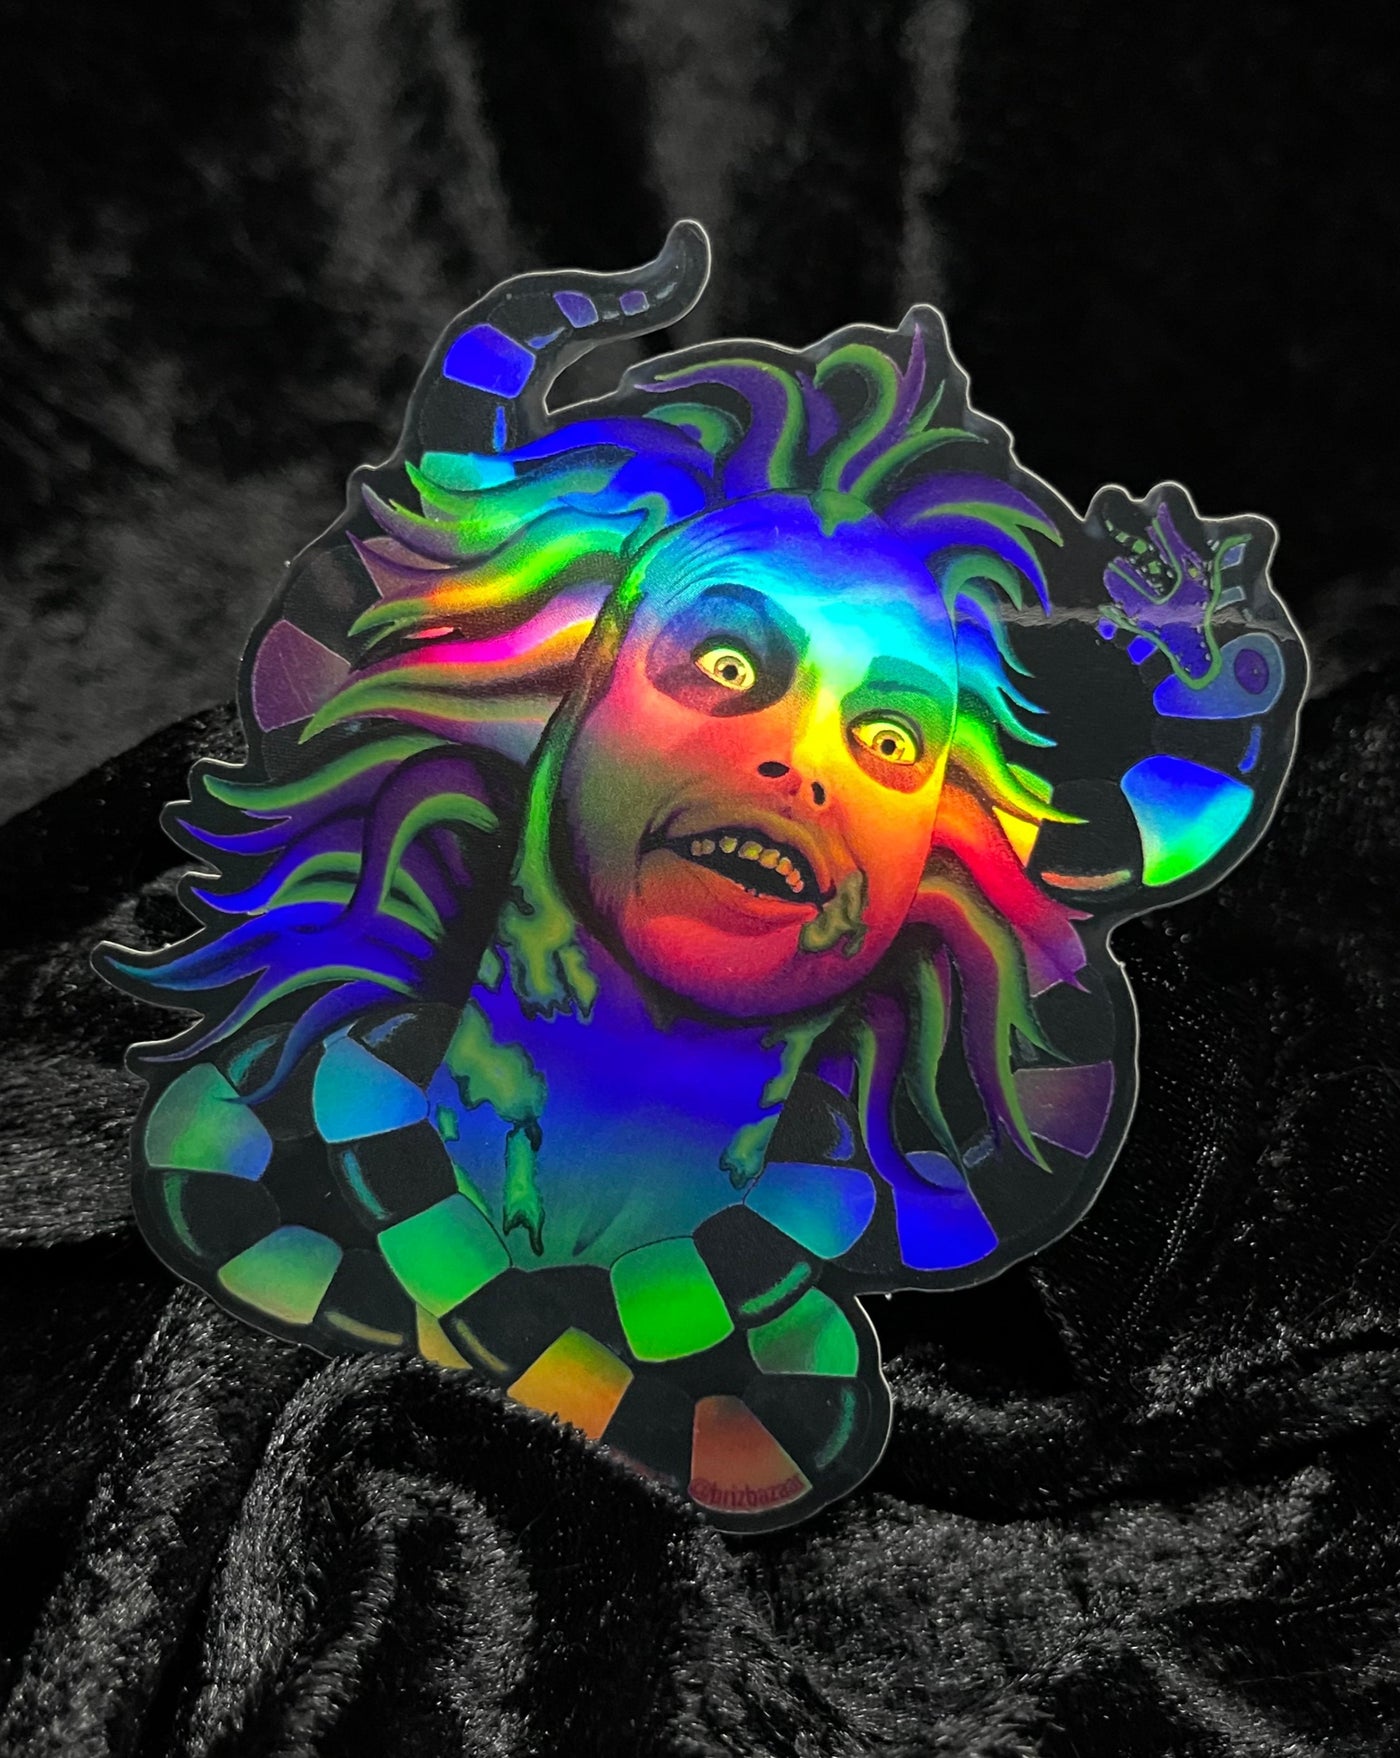 Holographic sticker of Stoned & Unusual